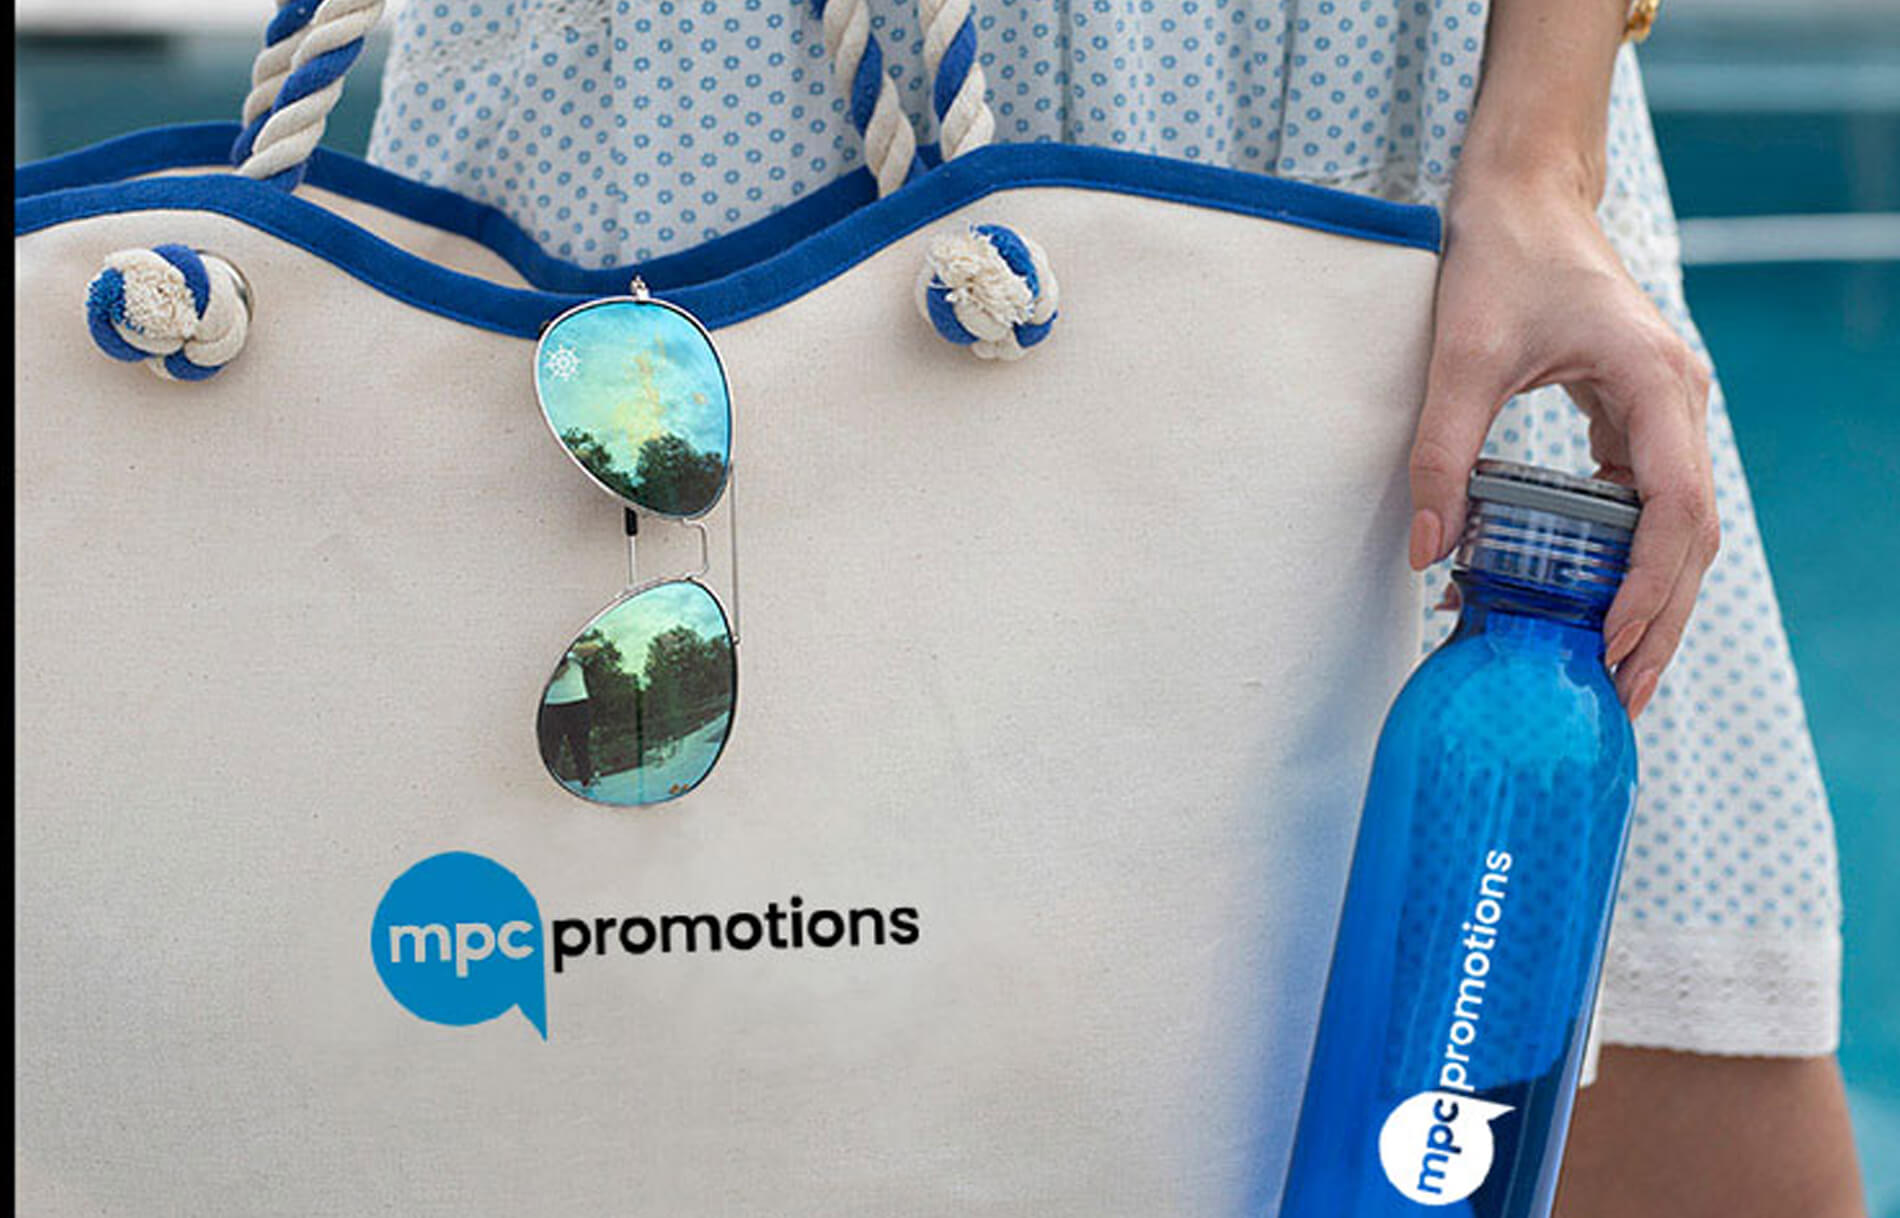 MPC Promotions bag and bottle